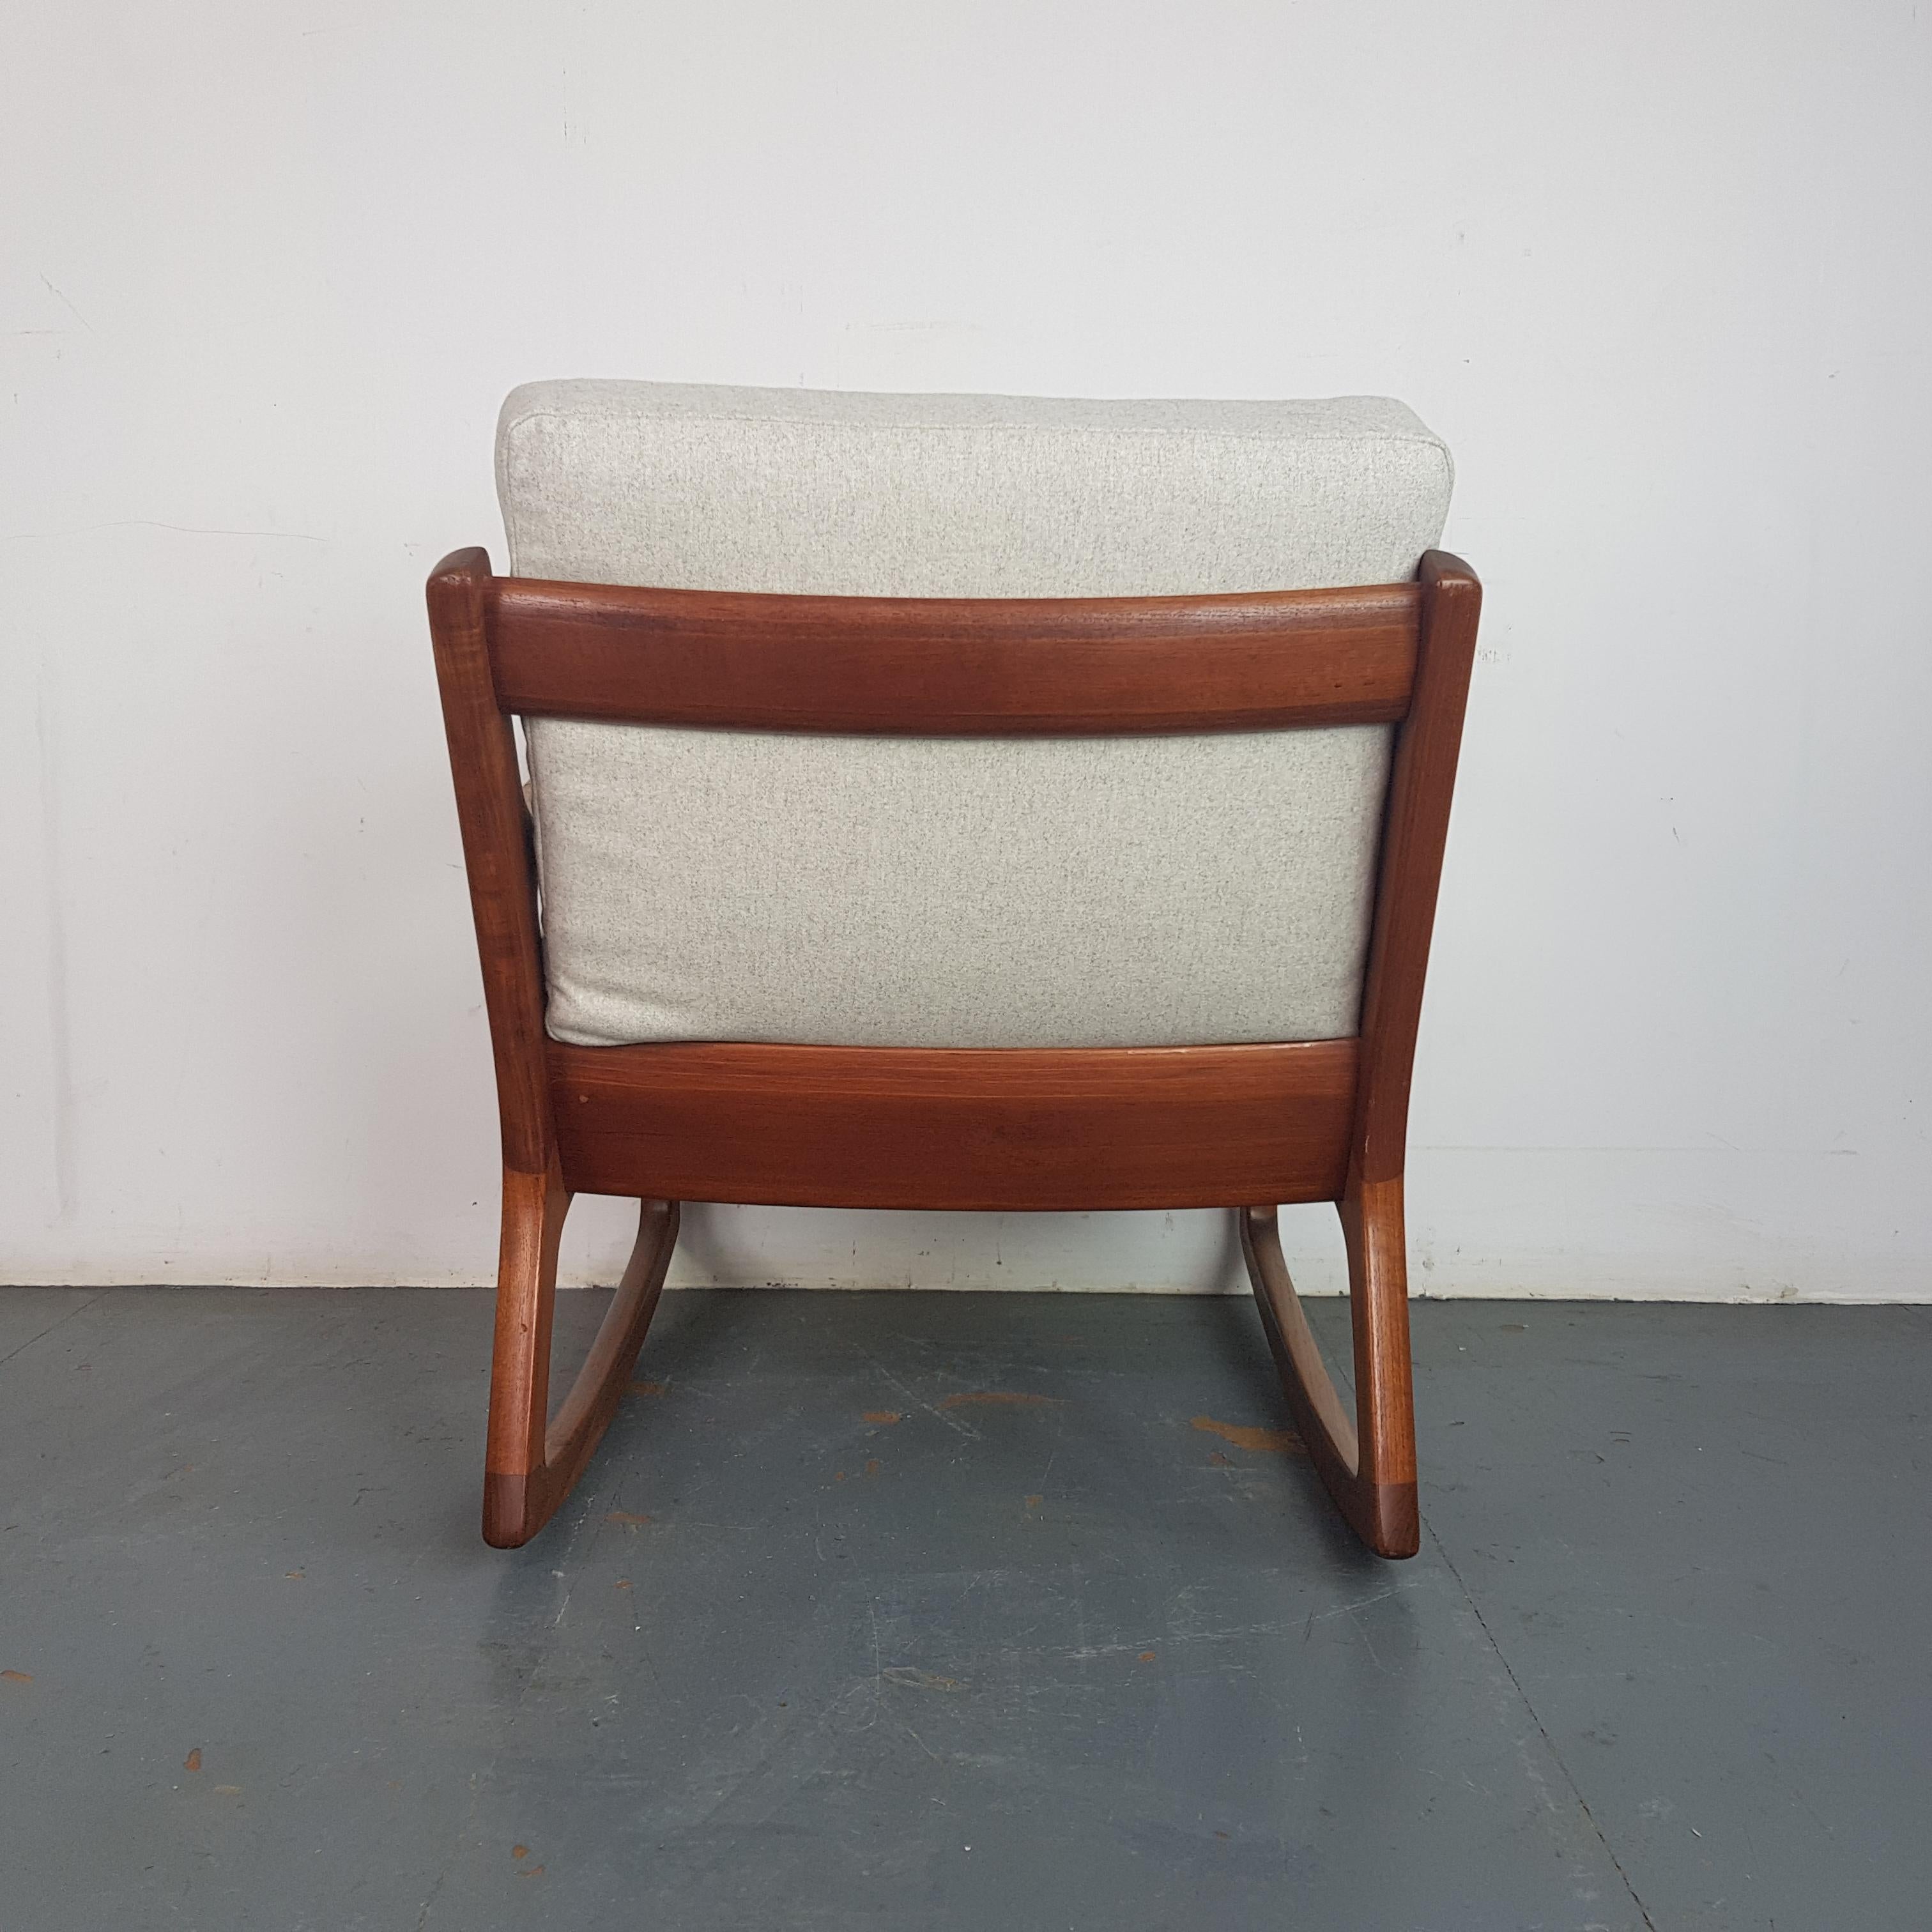 20th Century Ole Wanscher, 1960s Teak Rocking Chair Made by France and Son, Denmark